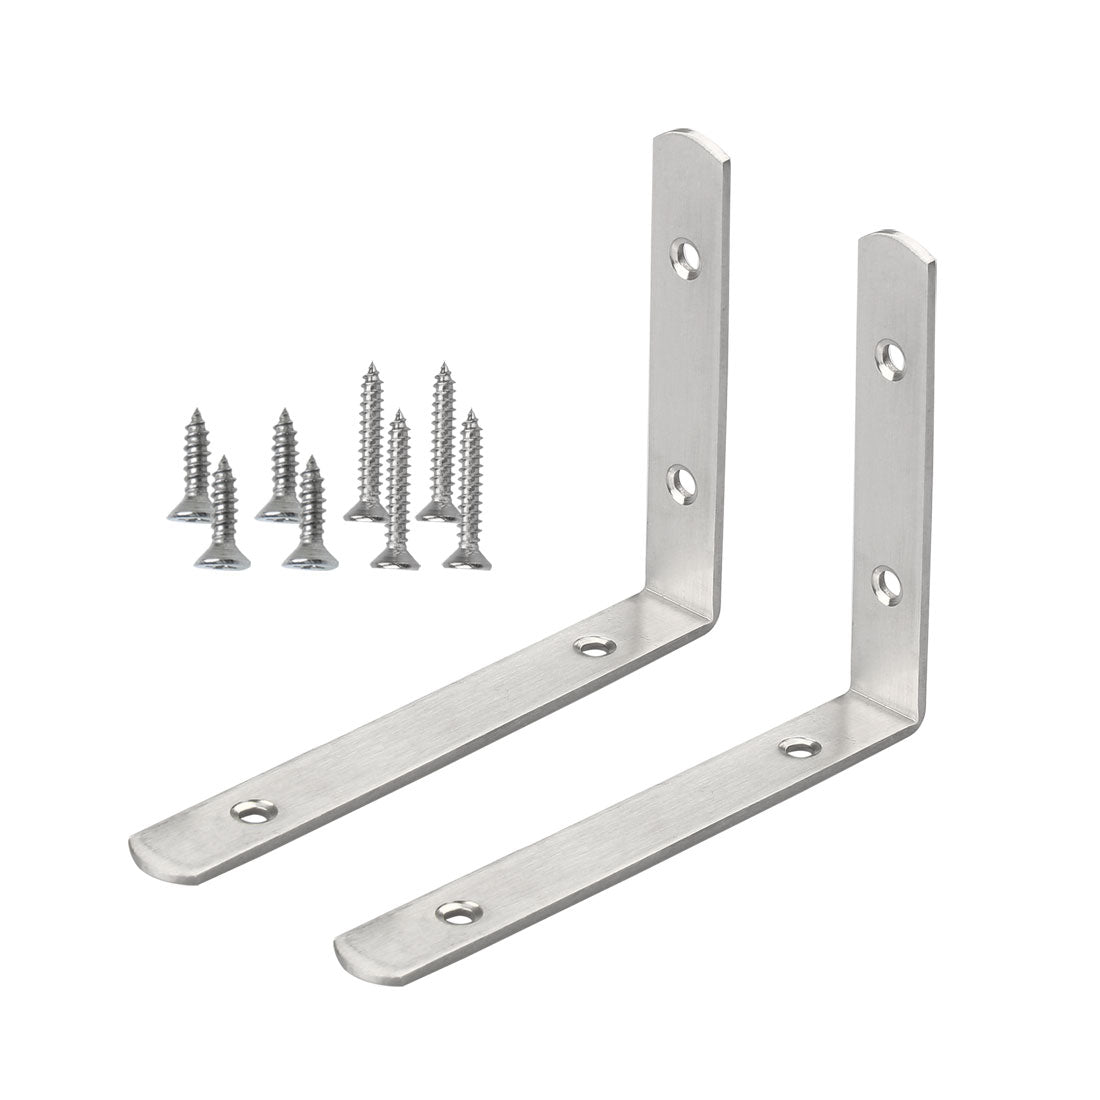 uxcell Uxcell Angle Bracket Stainless Steel Brace Fastener Support w Screws 150 x 110mm, 2pcs